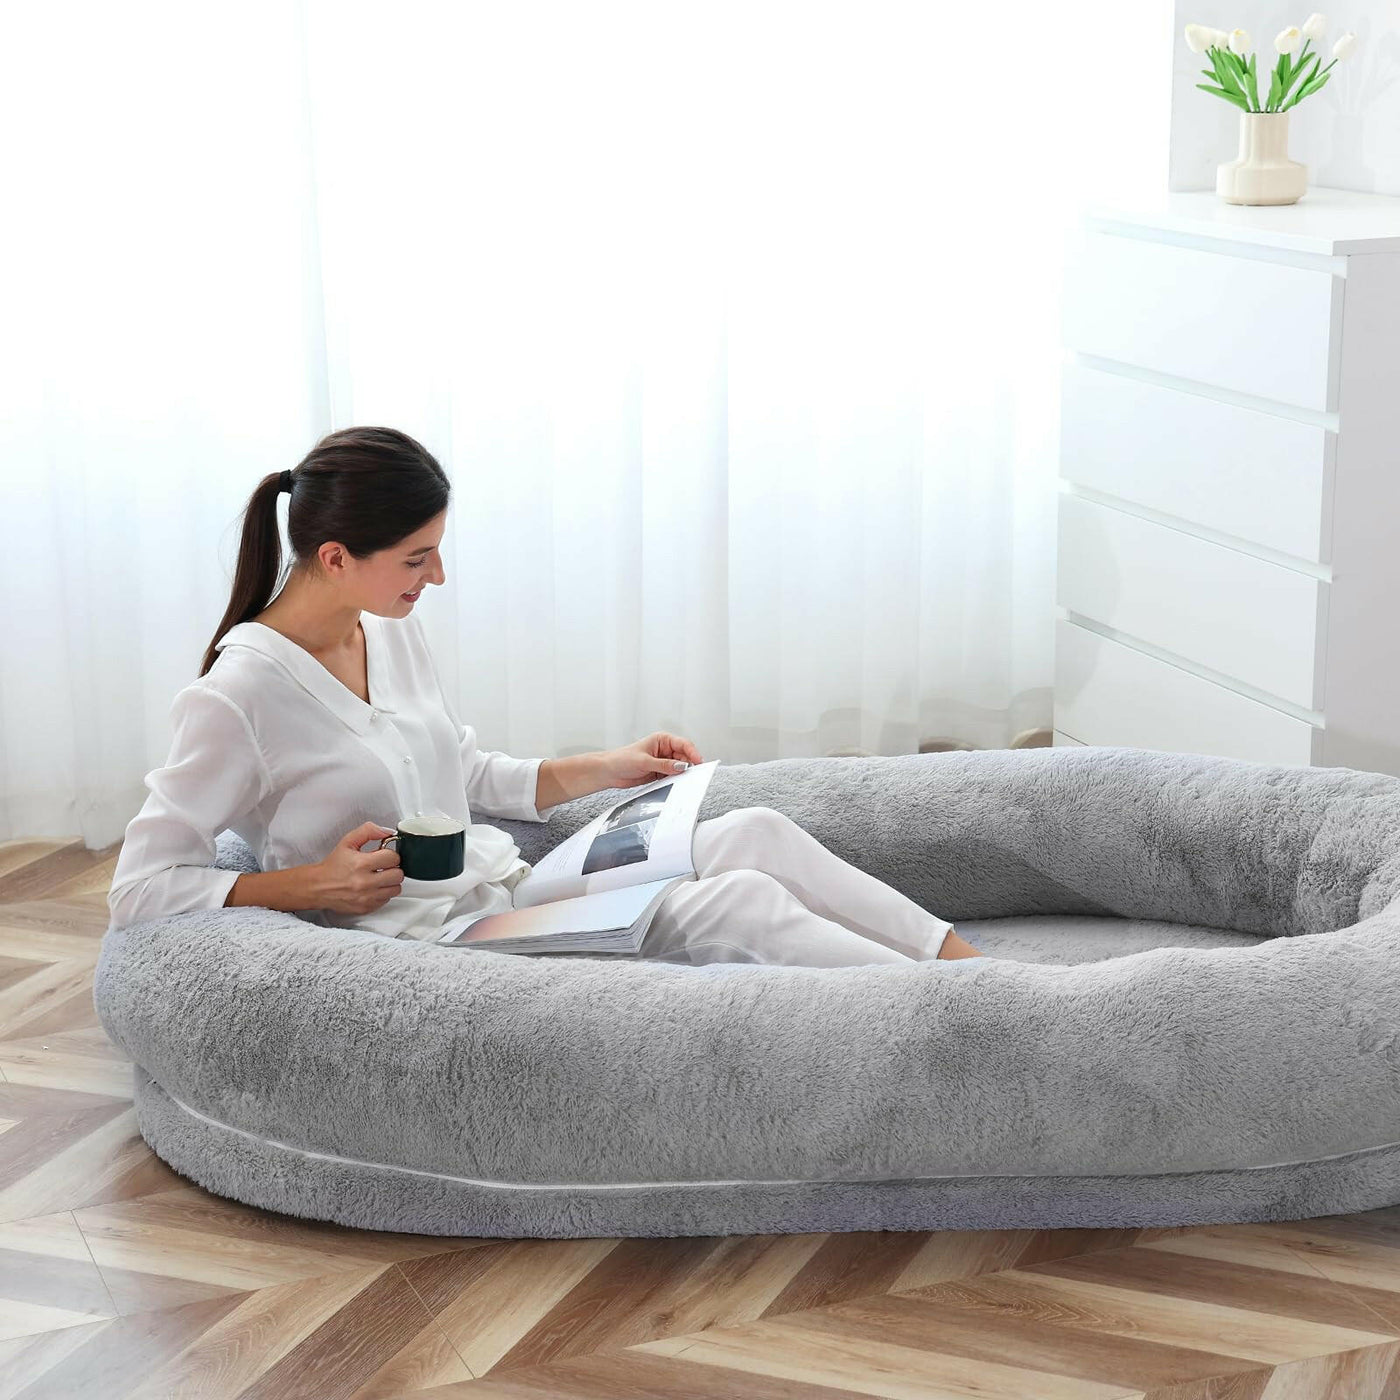 The Plufl Human Dog Bed™.